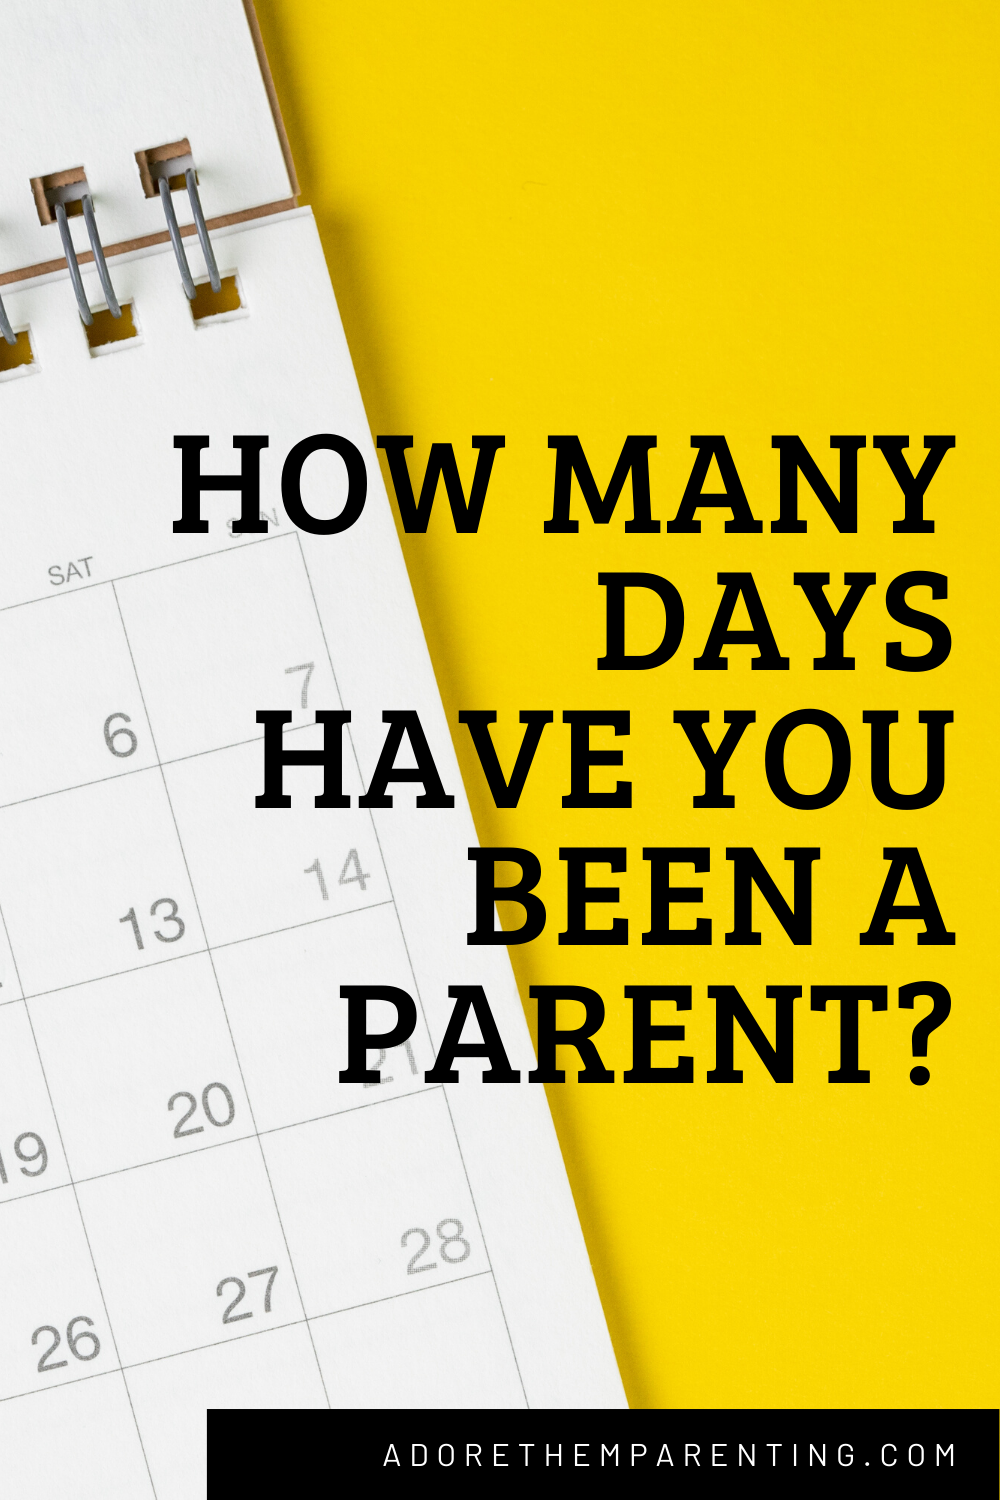 How many days have you been a parent